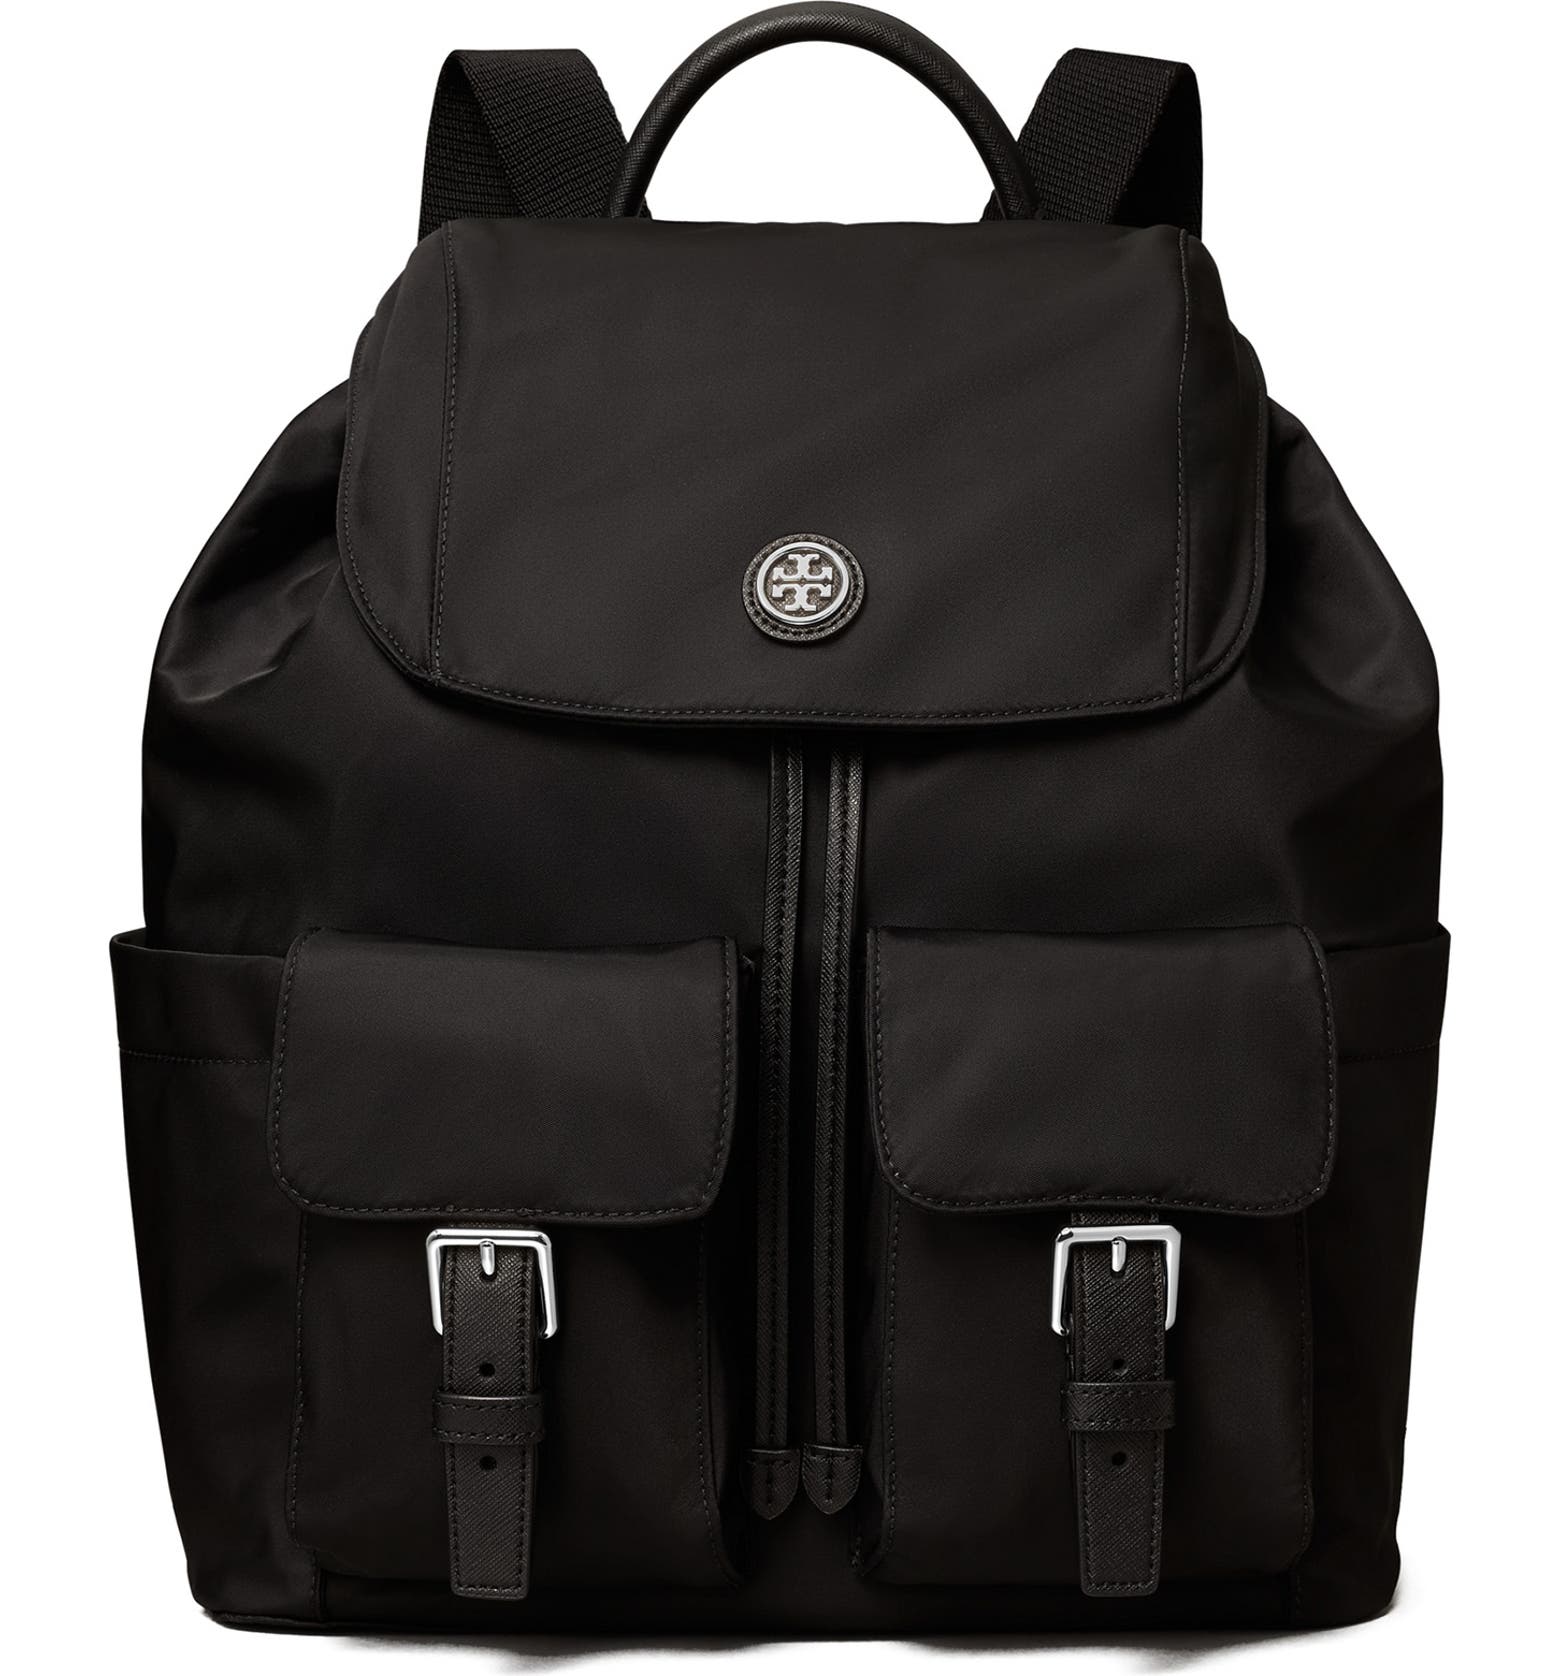 Black Nylon Backpack from Tory Burch